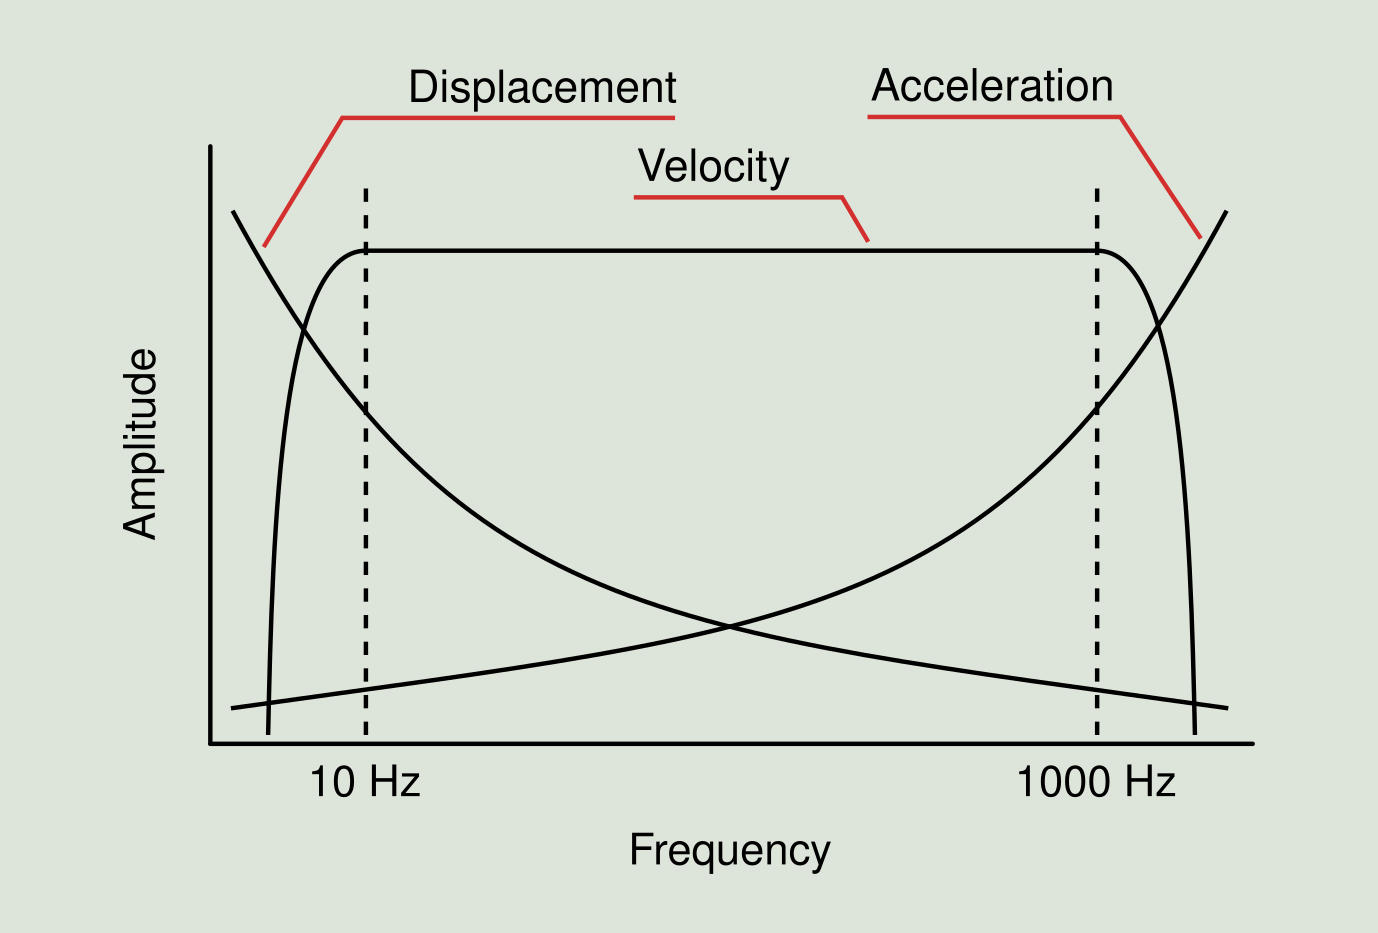 Figure 2.12: Magnitude of interest as a function of frequency